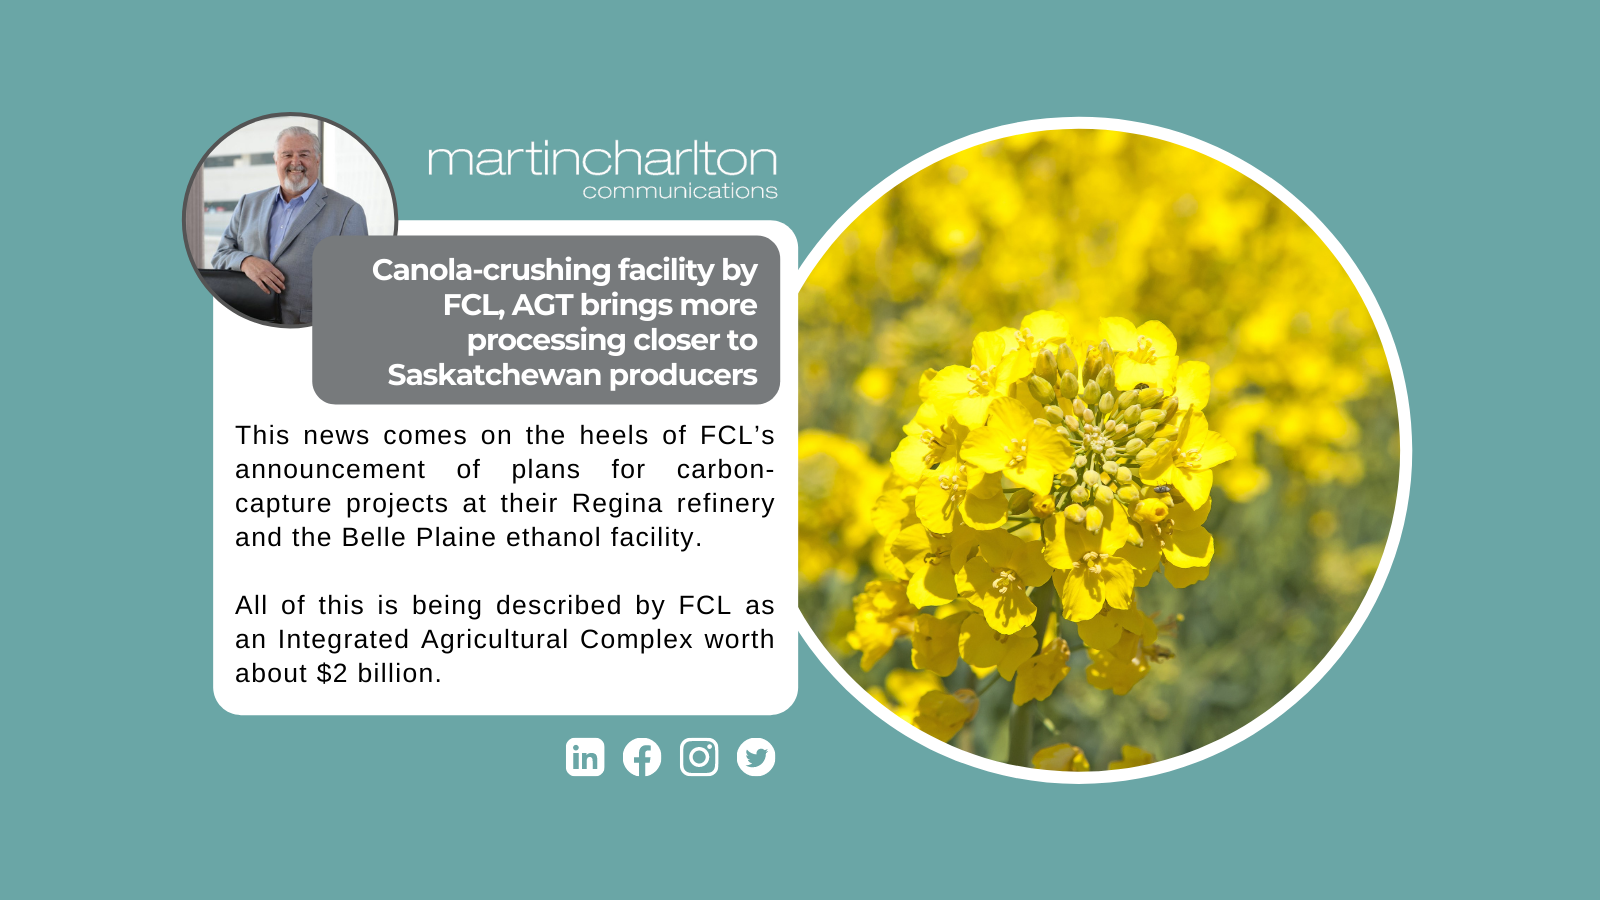 1.18.22 - Paul commentary - FCL AGT canola crushing